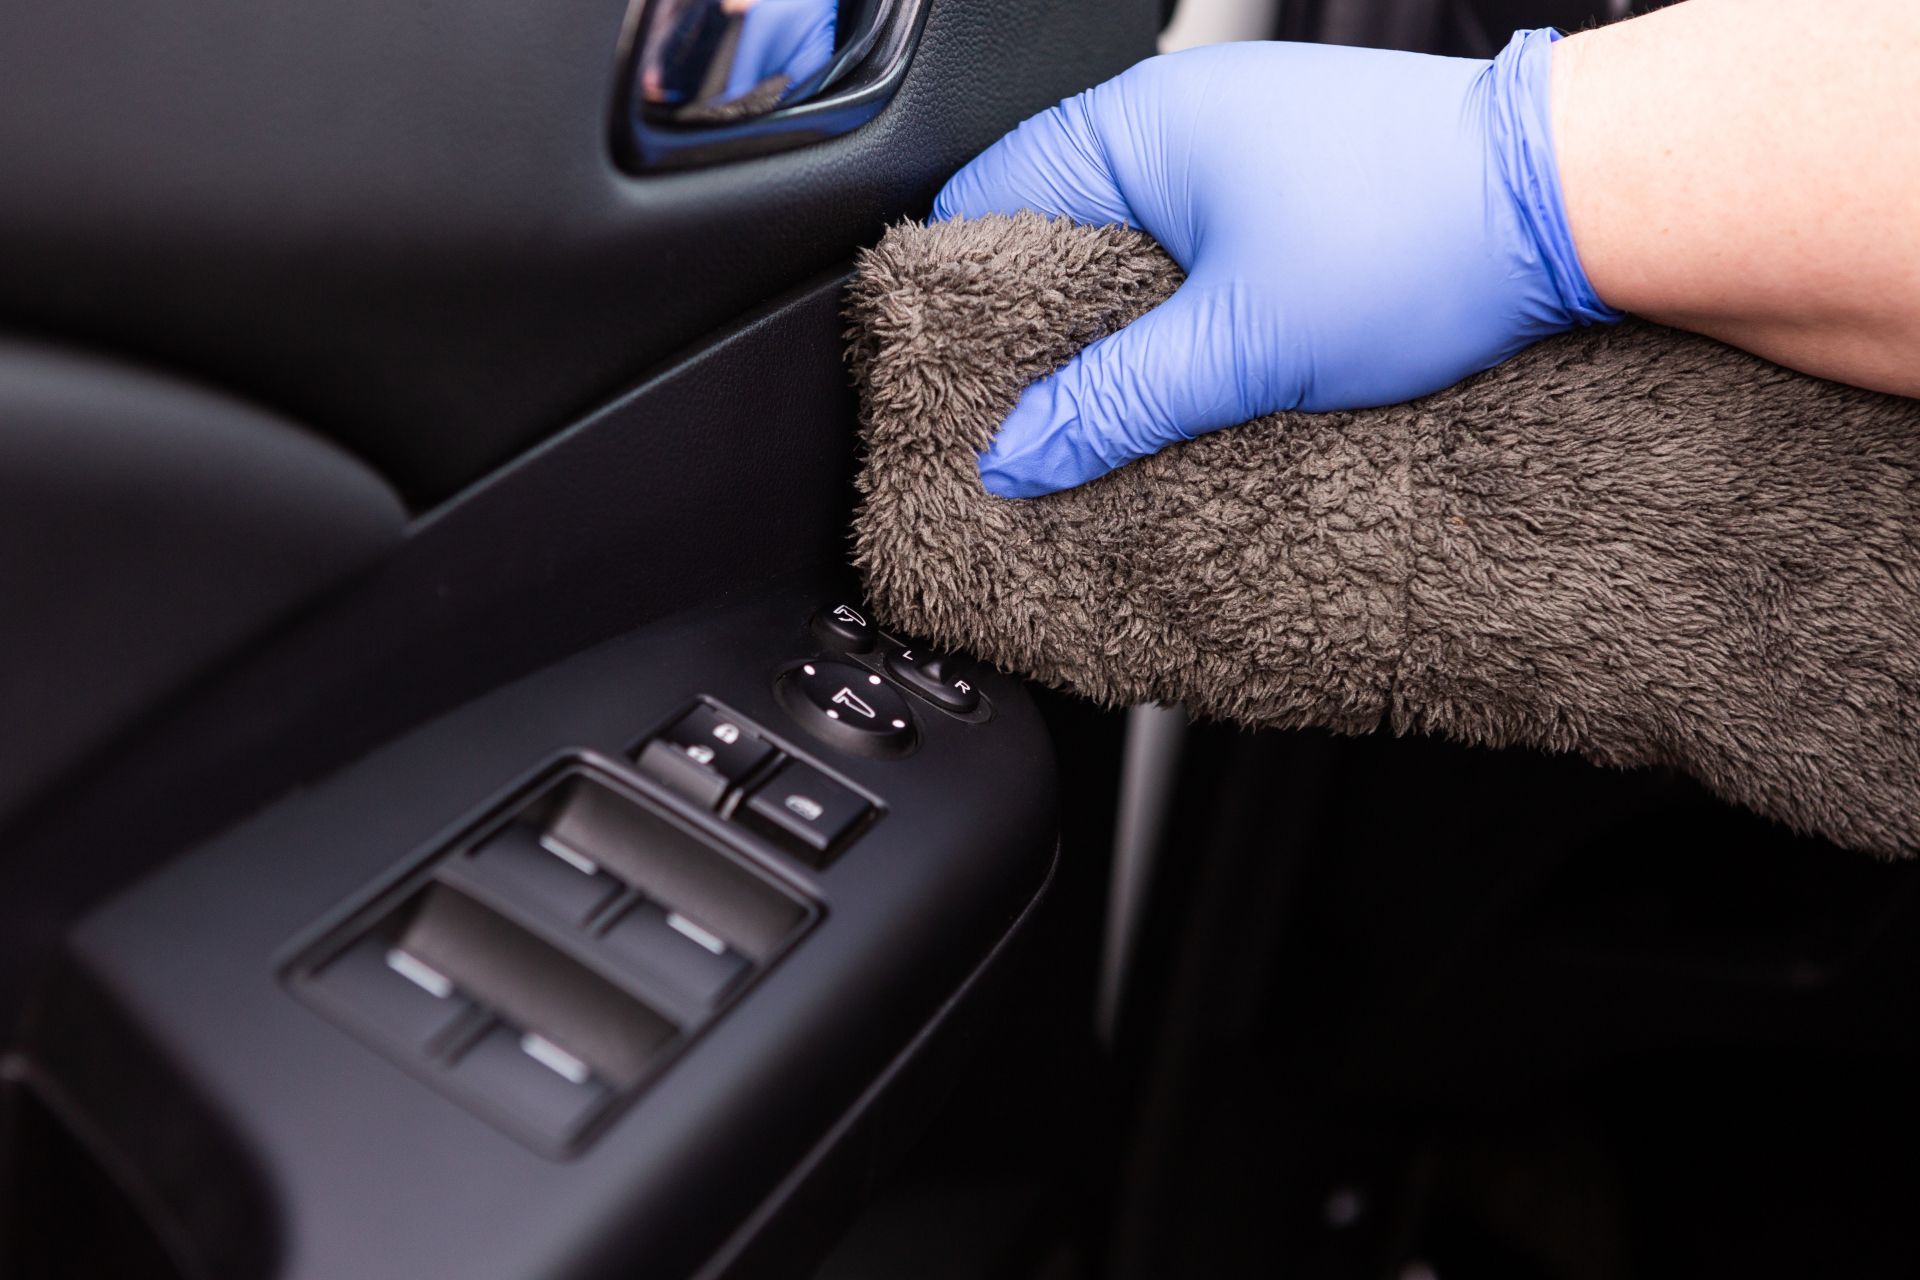 In a car in Duluth, GA, a person wearing blue gloves is diligently cleaning the black interior door panel with a fluffy gray microfiber cloth. The door has window and mirror adjustment controls, highlighting the thoroughness of the detailing service provided.